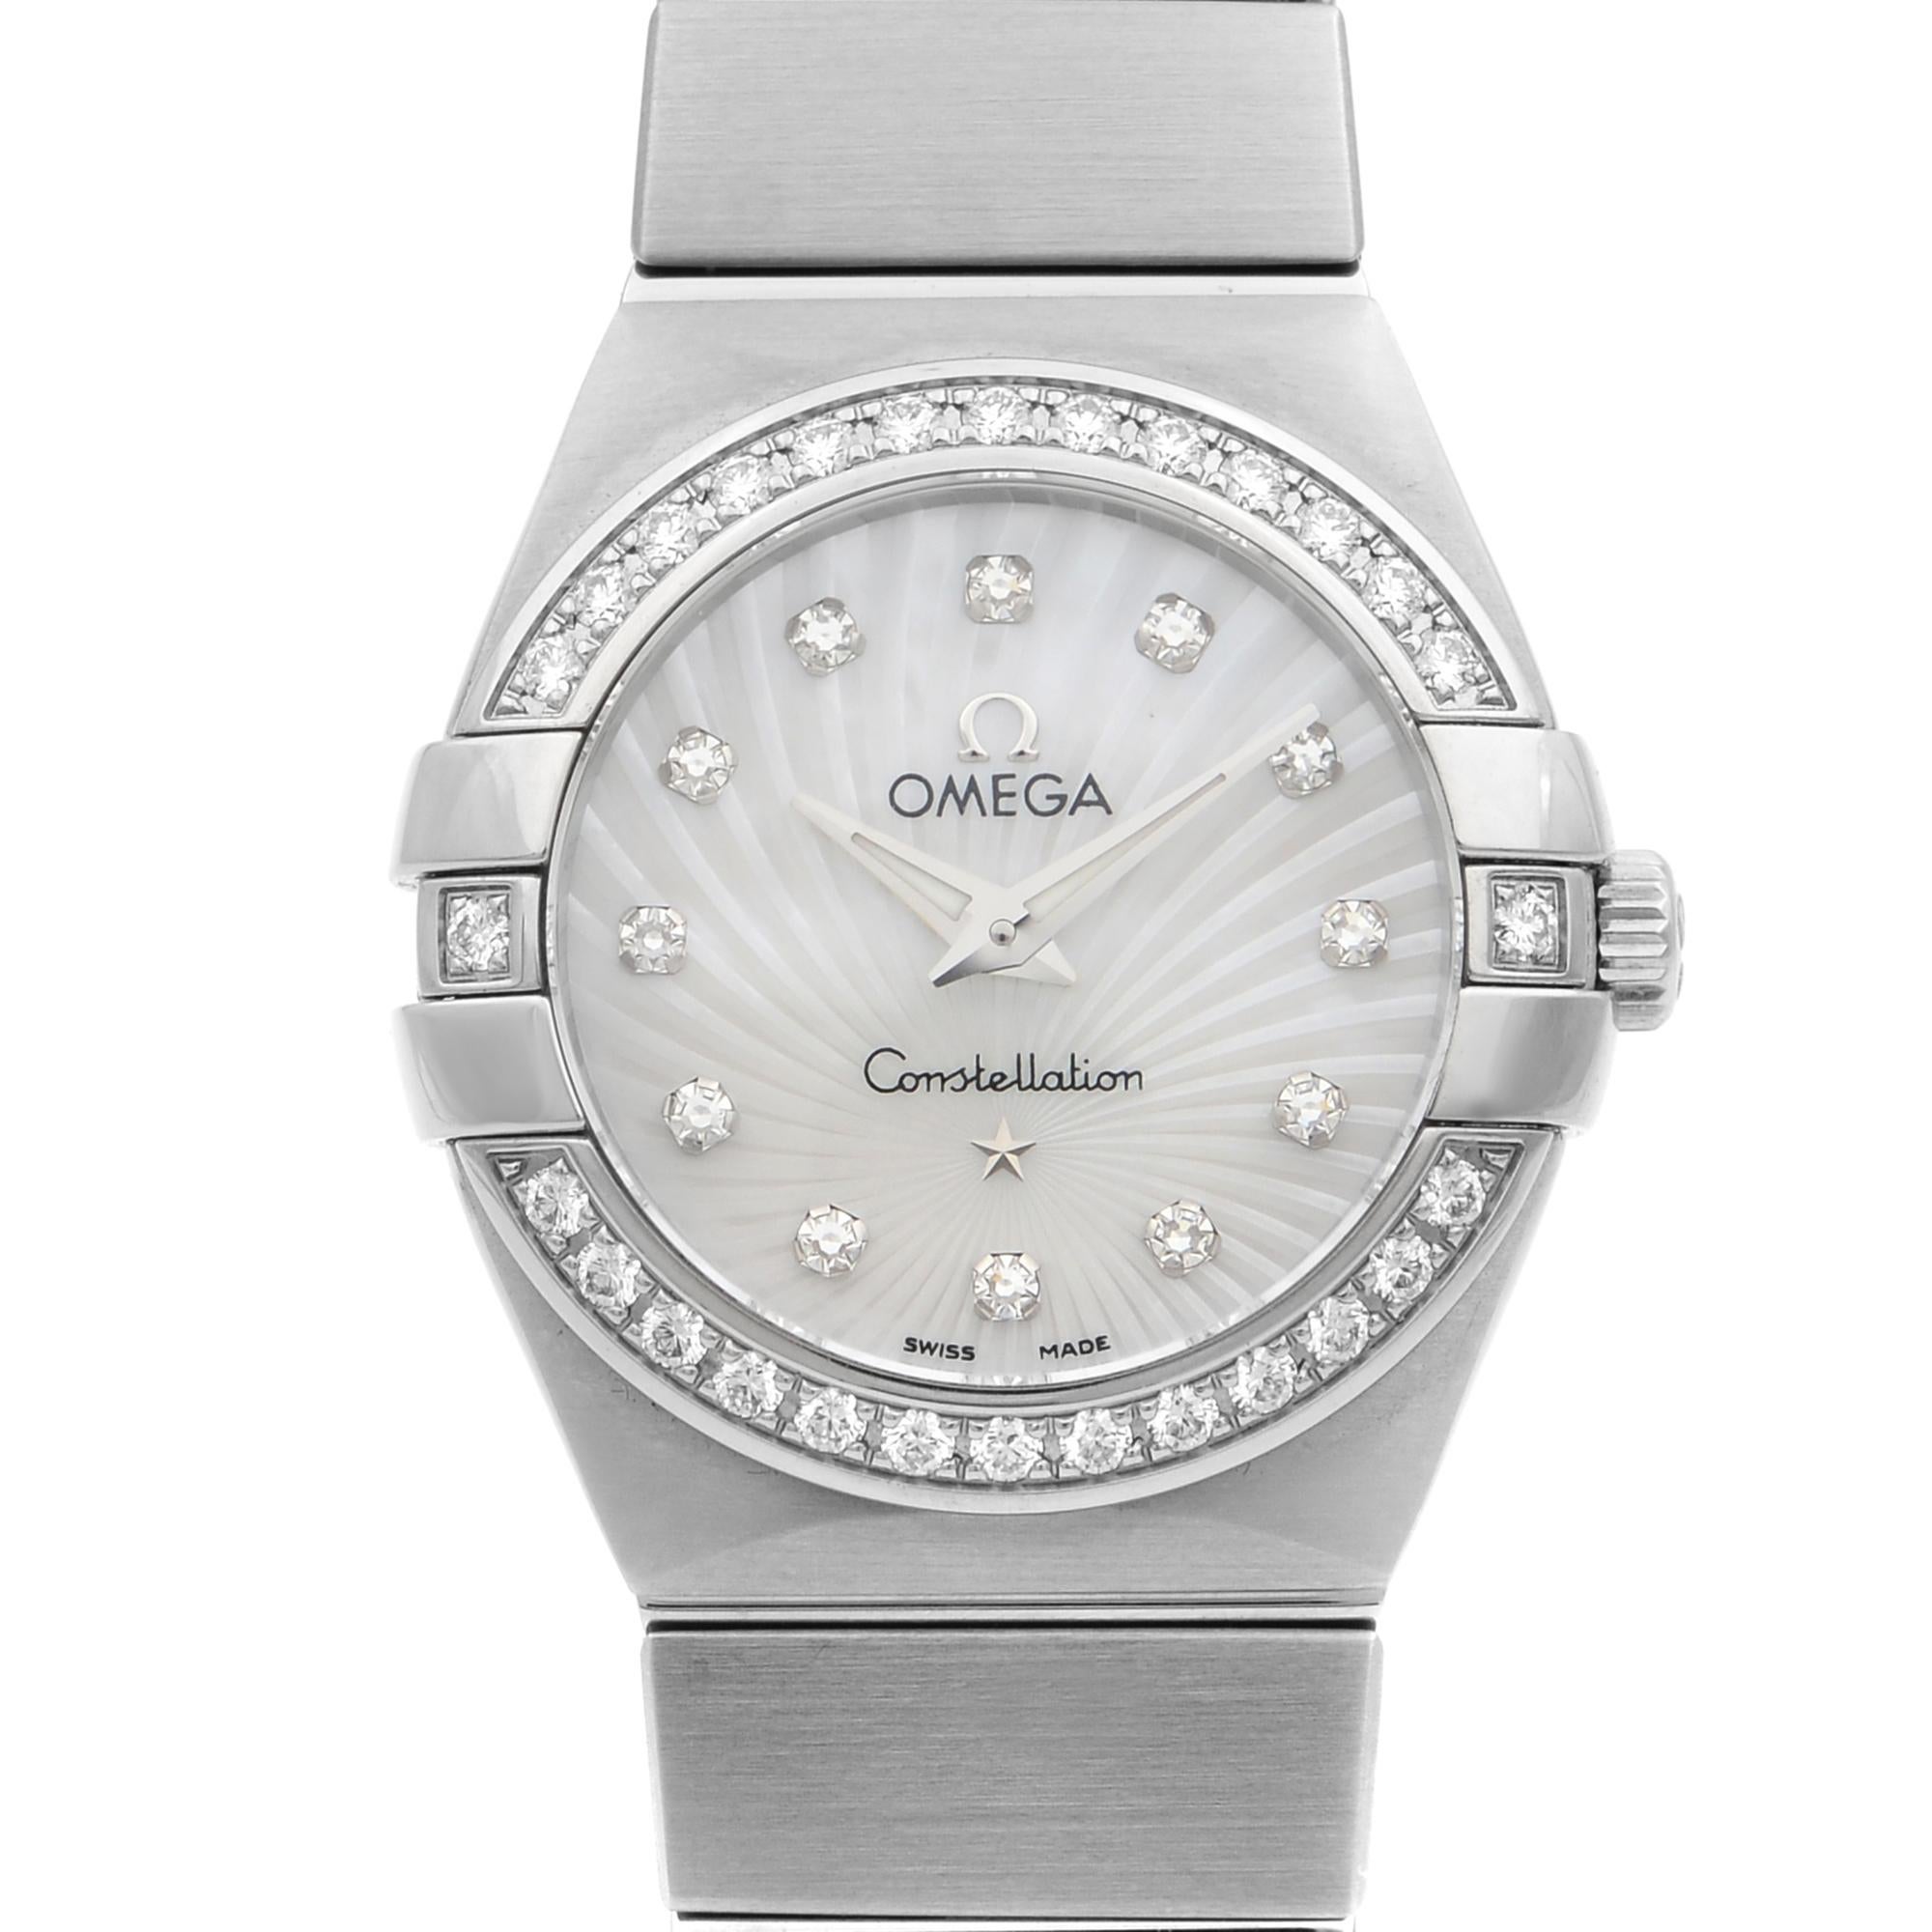 This display model Omega Constellation  123.15.24.60.55.002 is a beautiful Womens timepiece that is powered by a quartz movement which is cased in a stainless steel case. It has a round shape face, diamonds dial and has hand diamonds style markers.